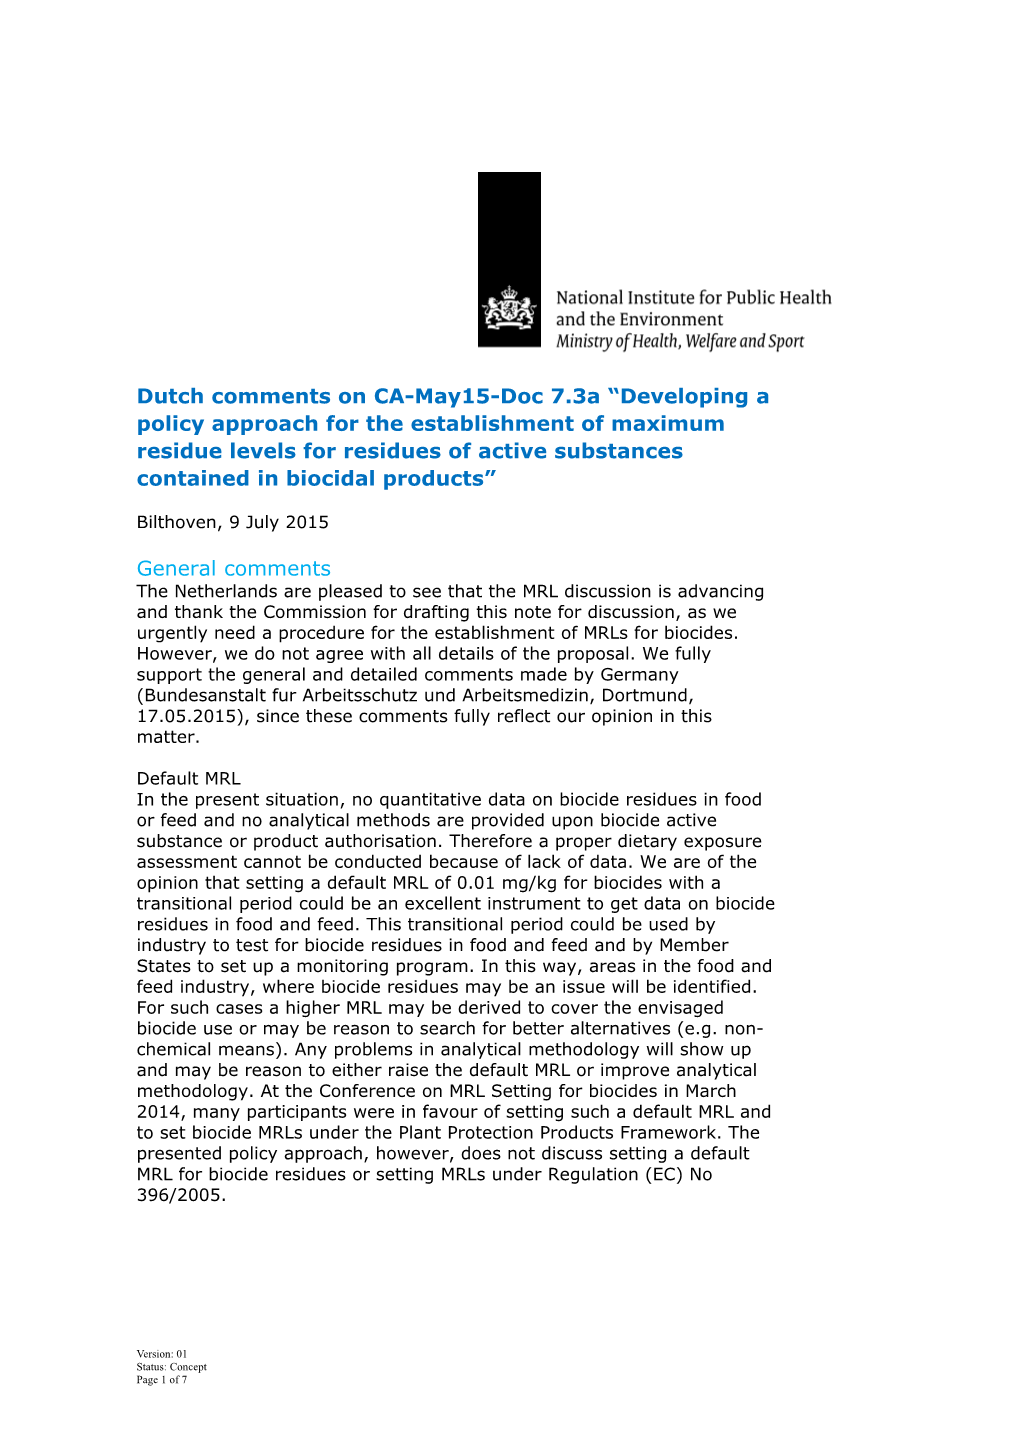 Dutch Comments on CA-May15-Doc 7.3A Developing a Policy Approach for the Establishment